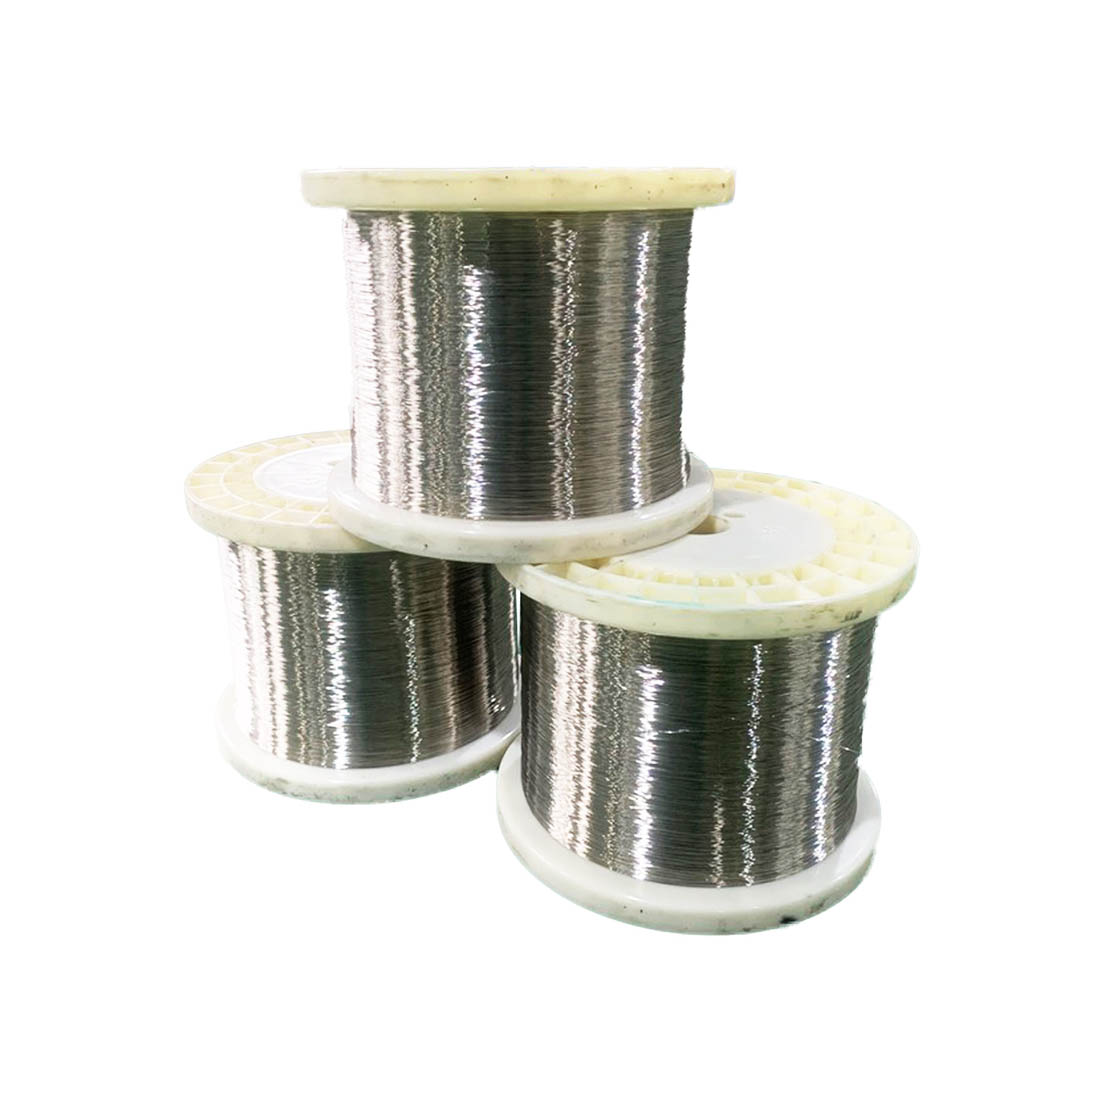 OEM Customized 13 Awg Nickel Plated Copper Wire - Source Factory 43 Awg Nickel Plated Copper Wire for Sale – Tianchuang Featured Image